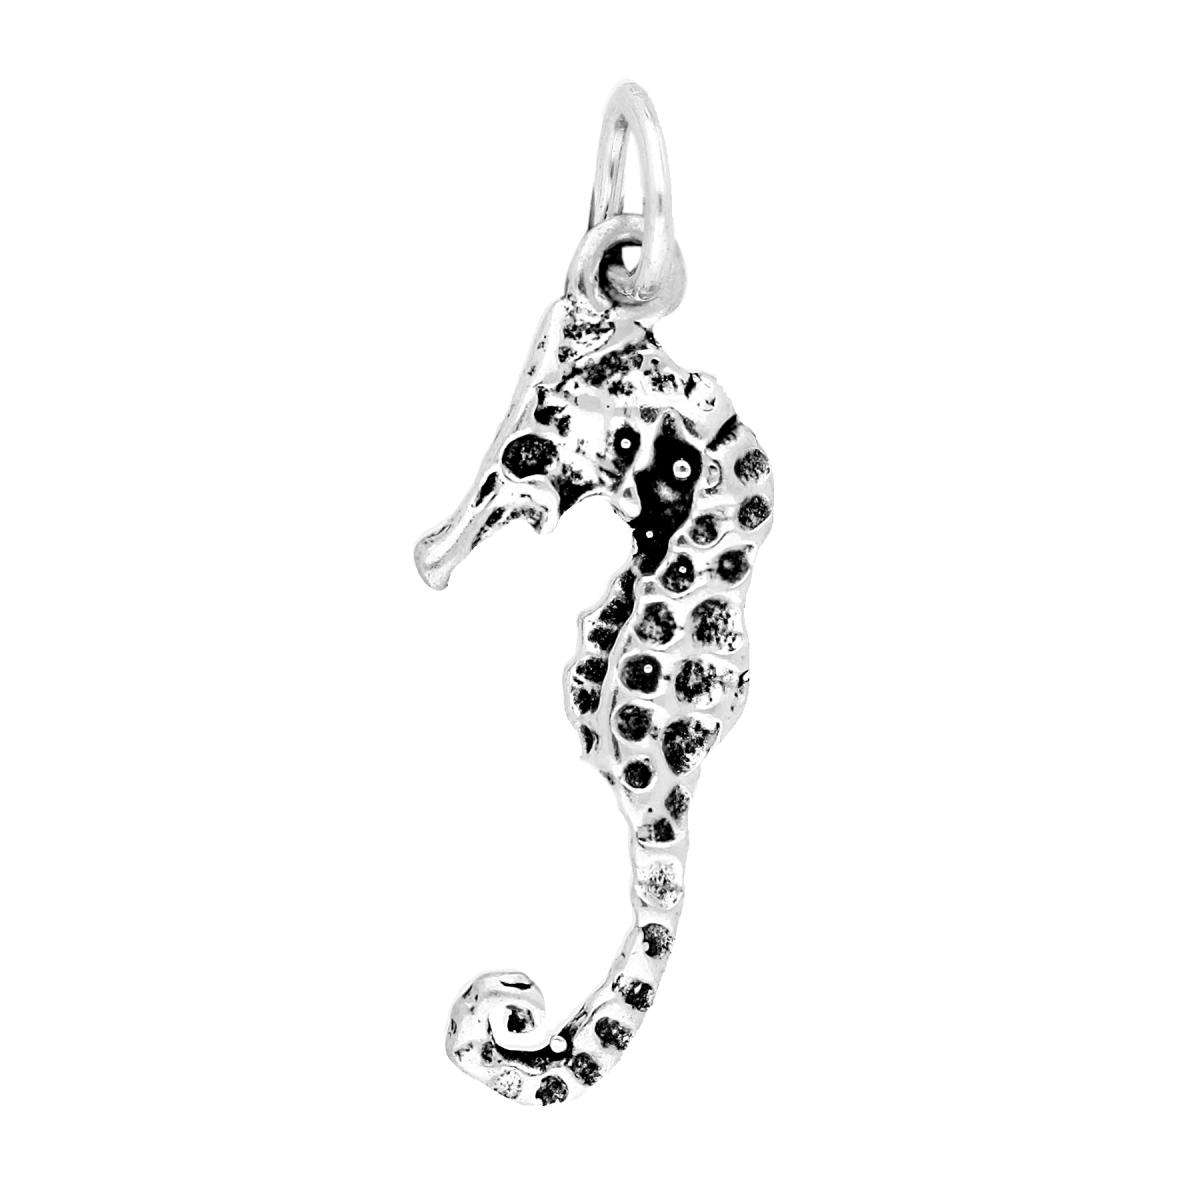 Huge Collections Seahorse Charm |926 Fine Silver Seahorse Charm|